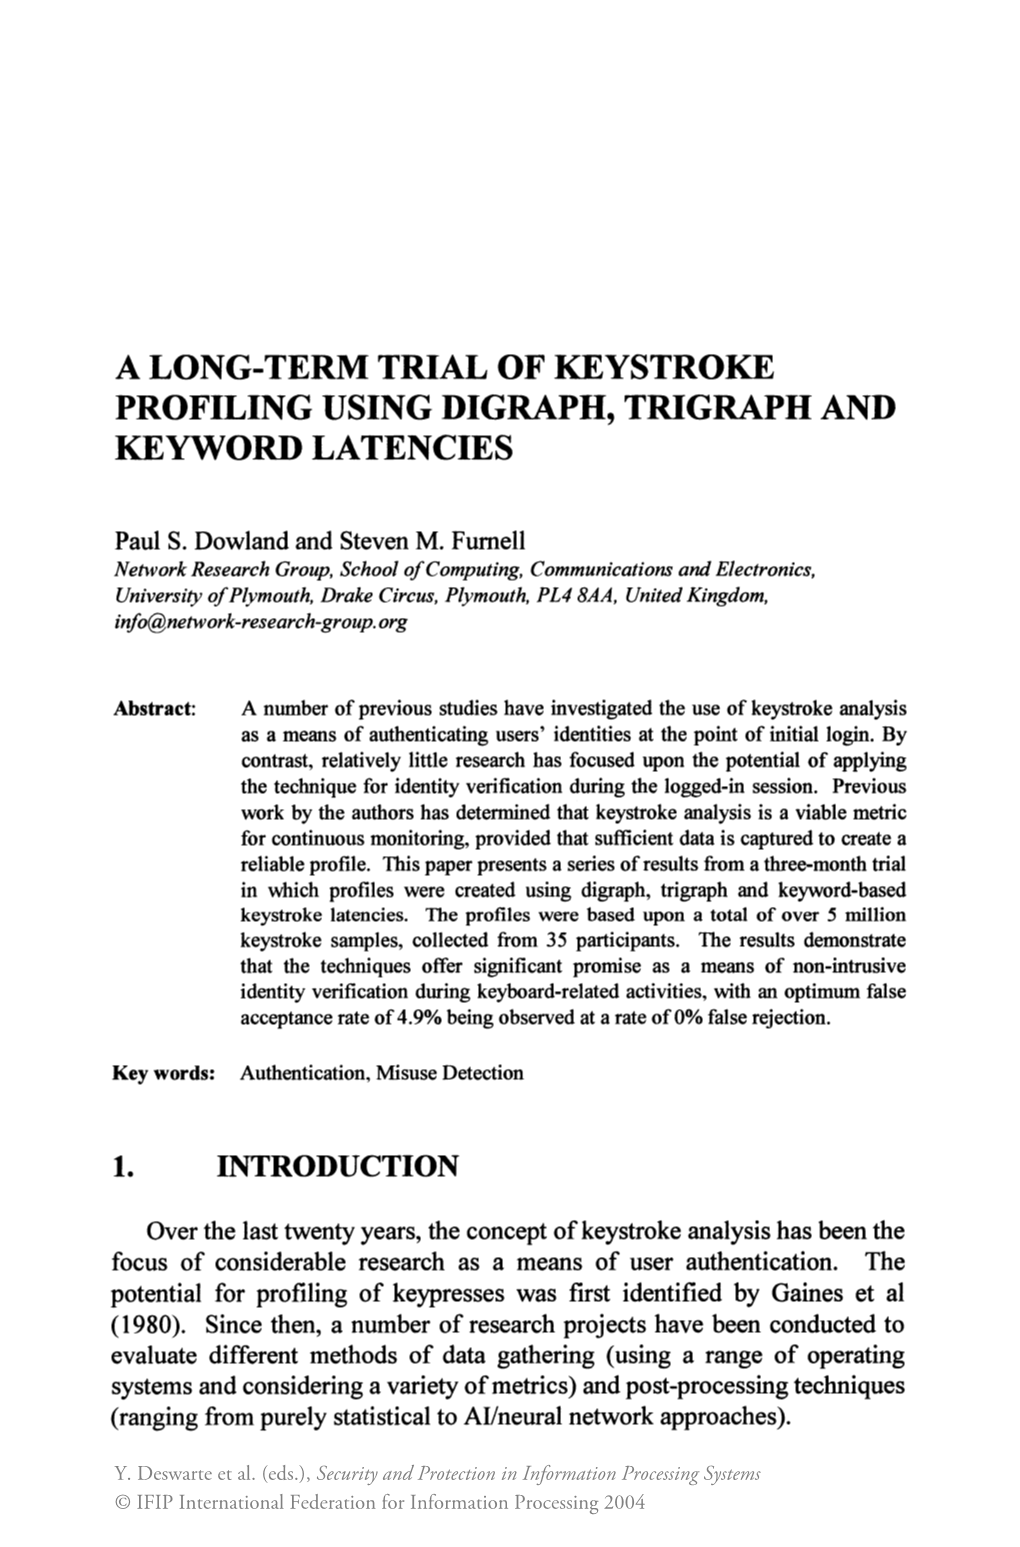 A Long-Term Trial of Keystroke Profiling Using Digraph, Trigraph and Keyword Latencies